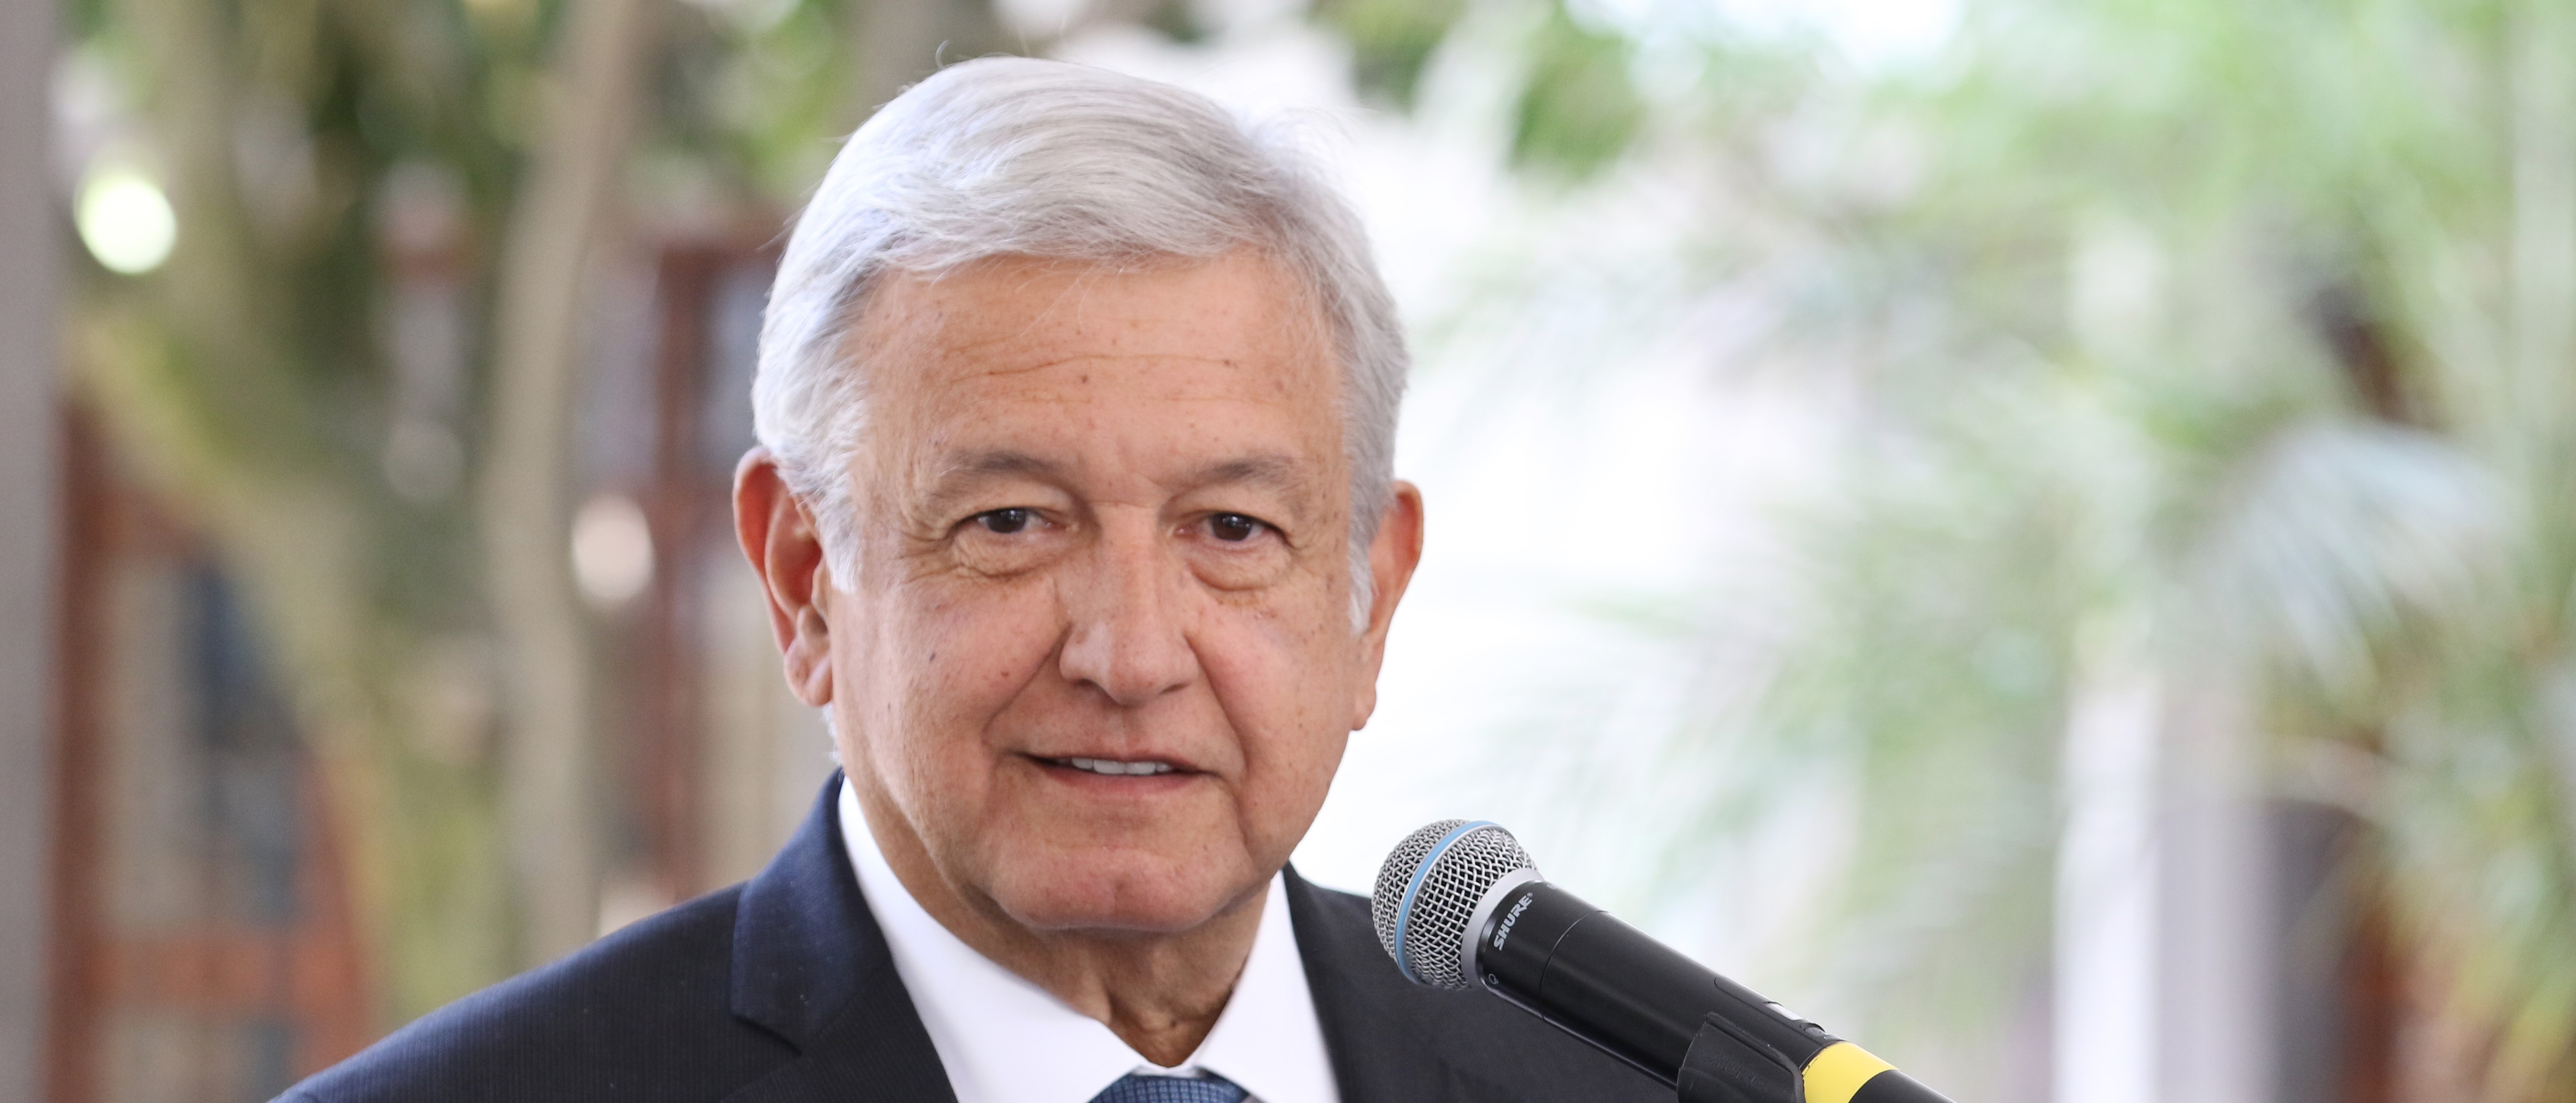 Mexico president: state has been main violator of human rights